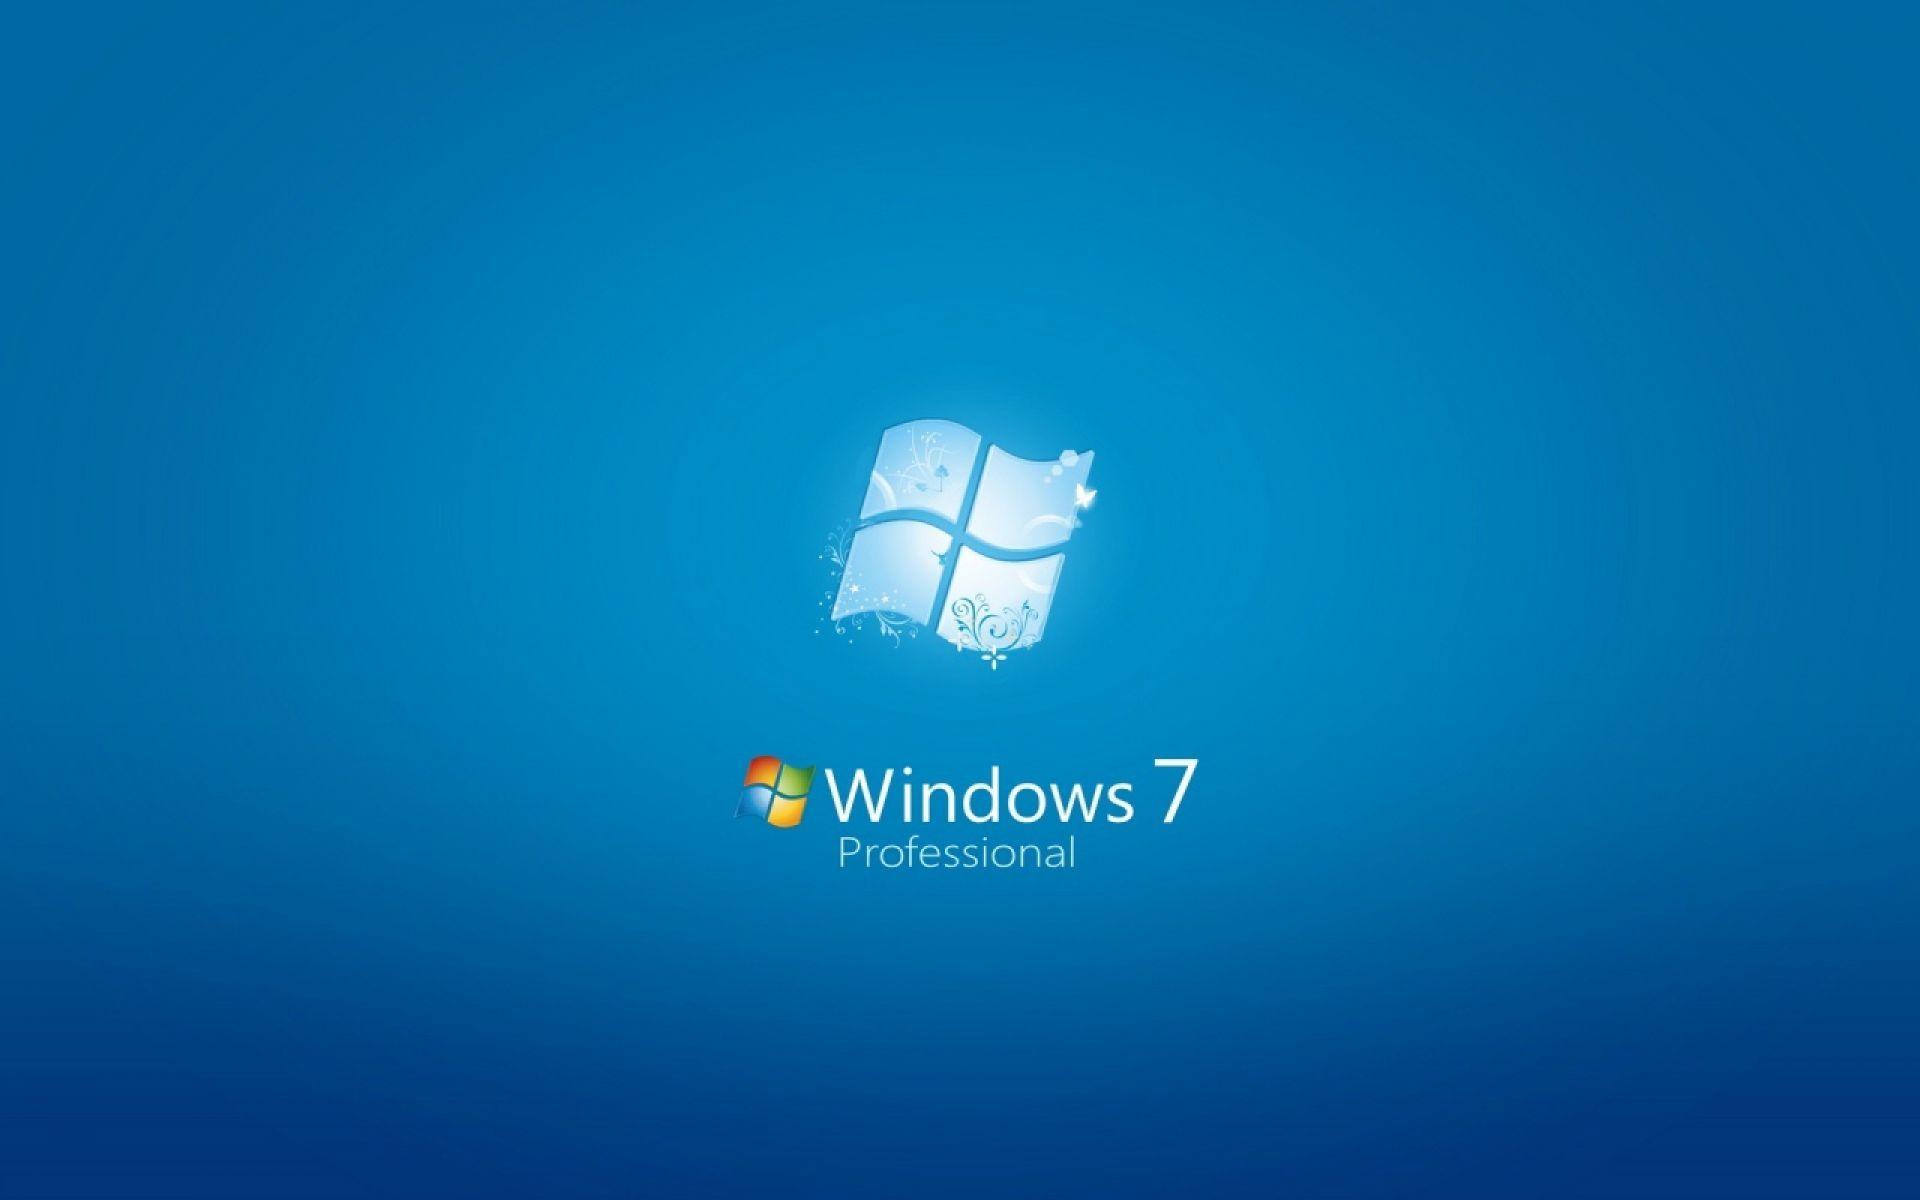 Ice Cast Windows 7 Professional. HD Brands and Logos Wallpaper